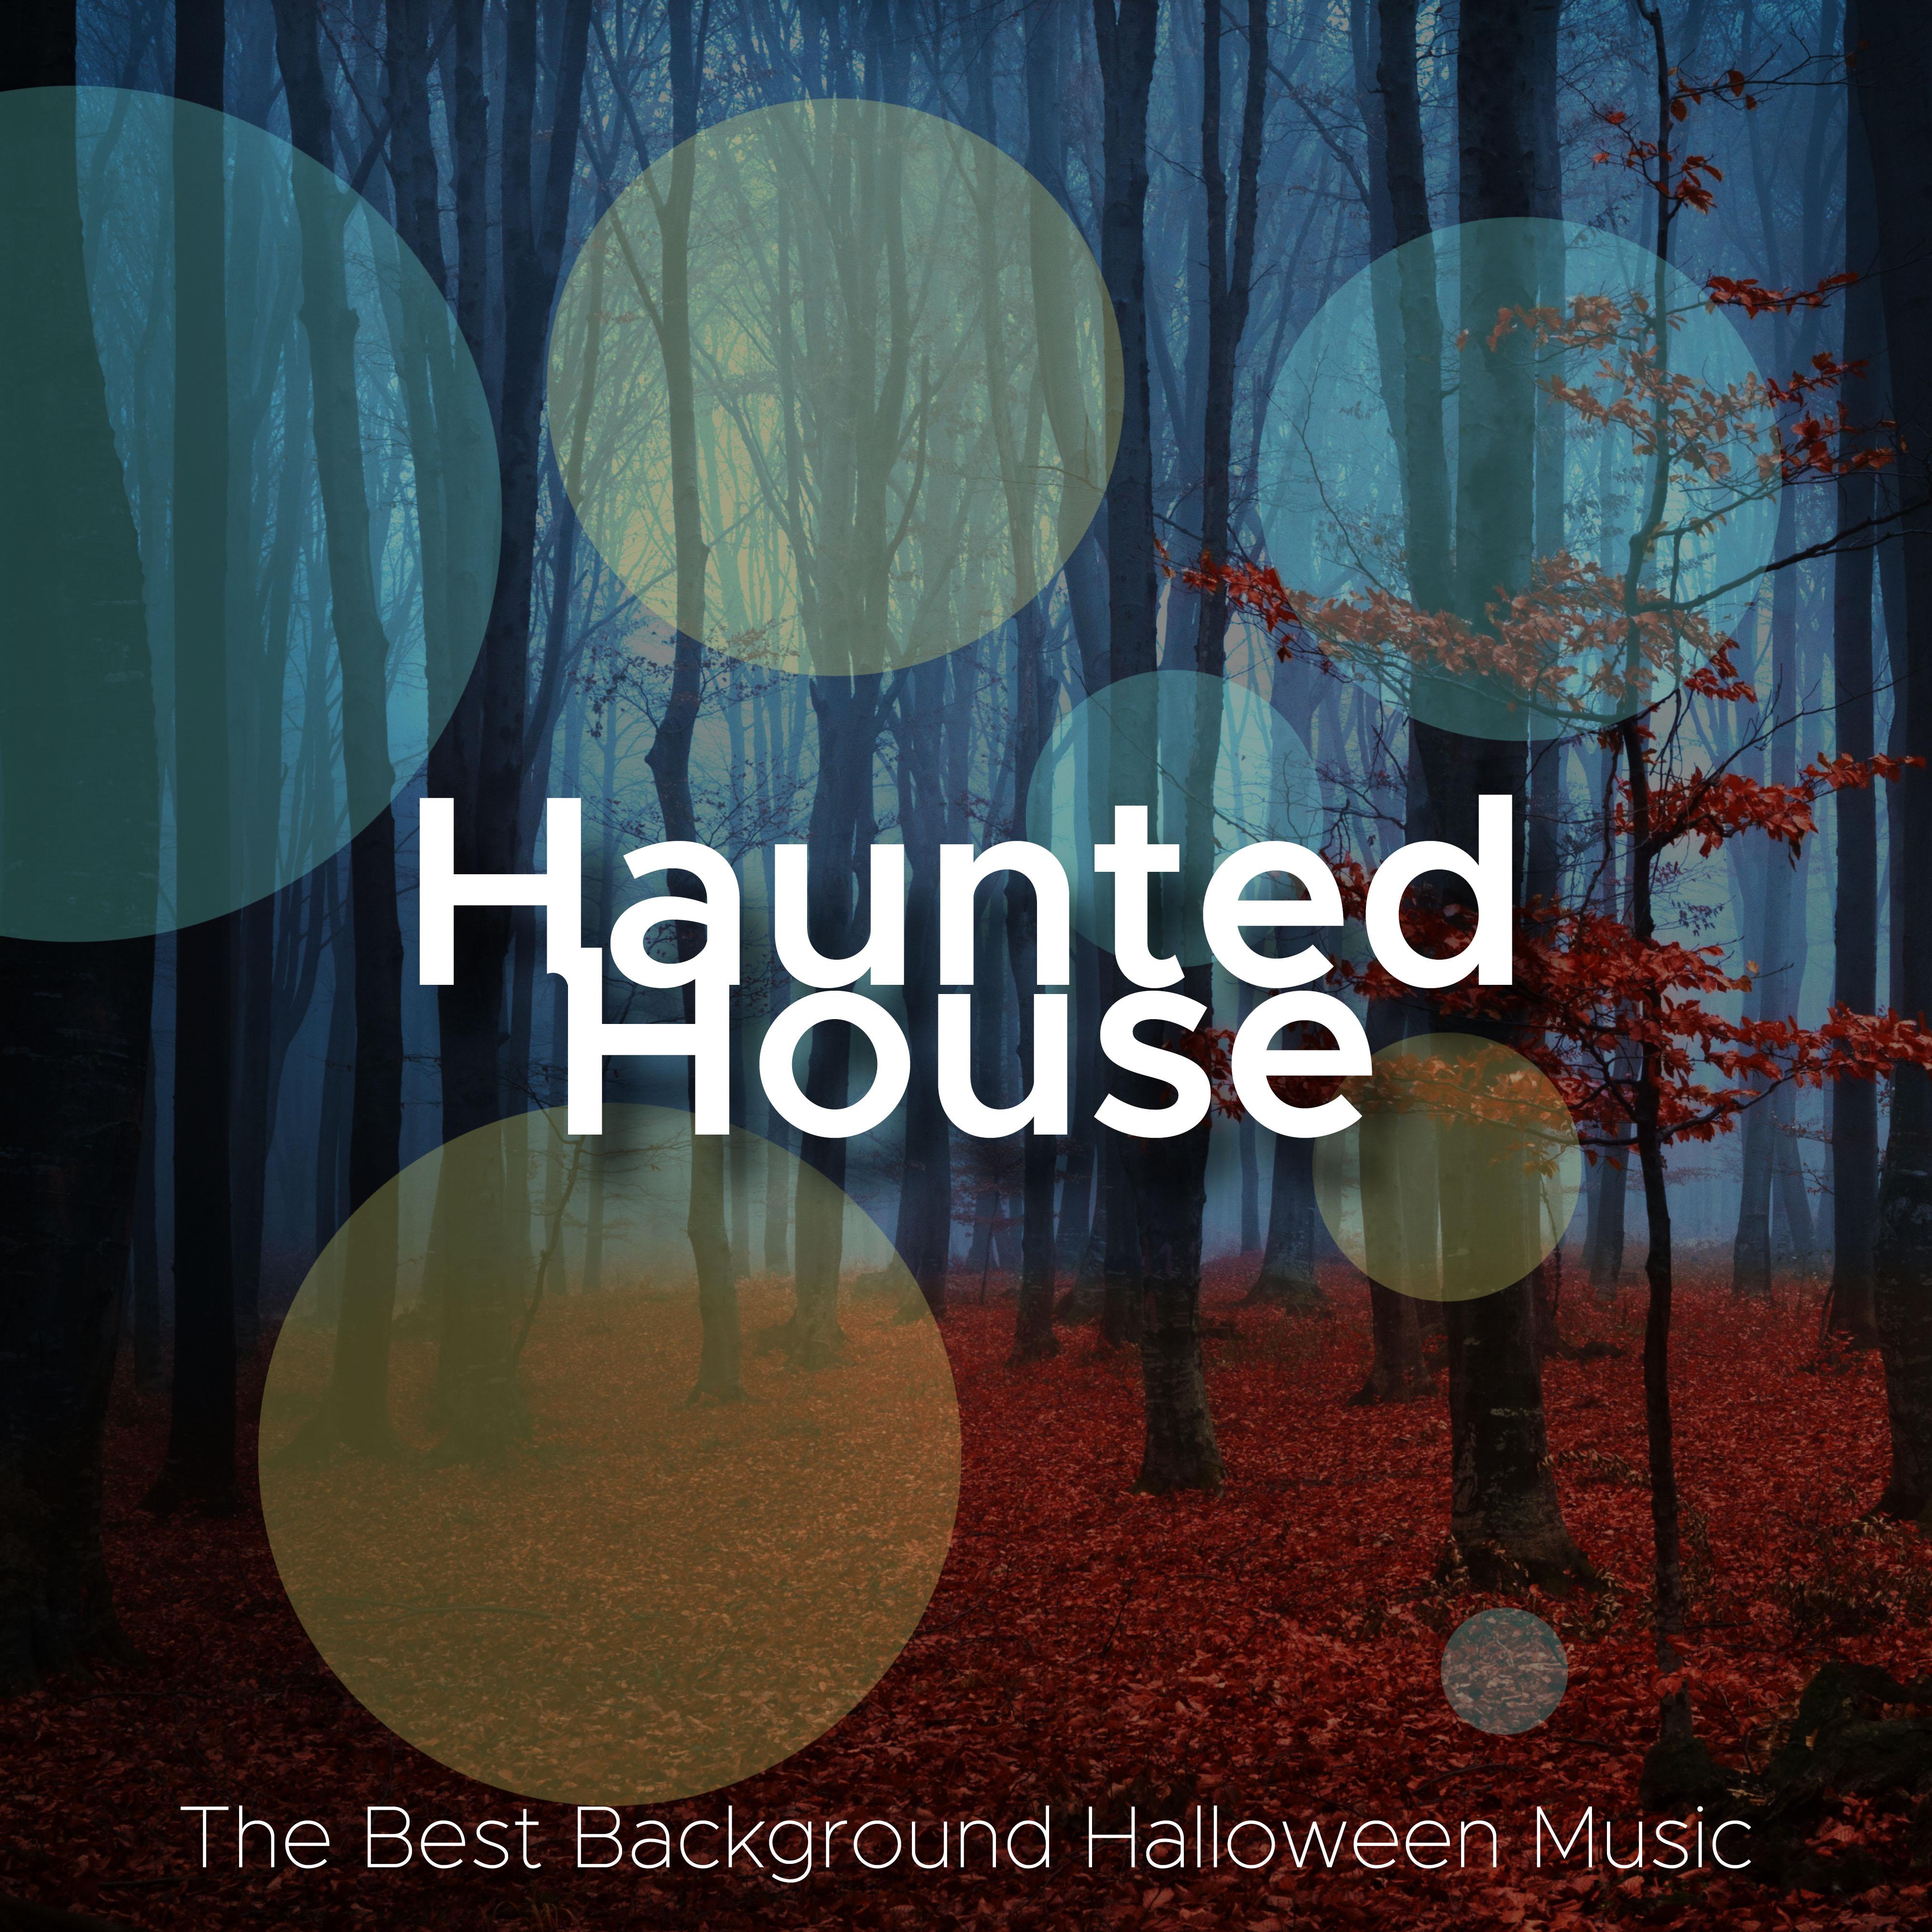 Haunted House - The Best Background Halloween Music for Parties in Denver, Los Angeles, Chicago, San Francisco, New York